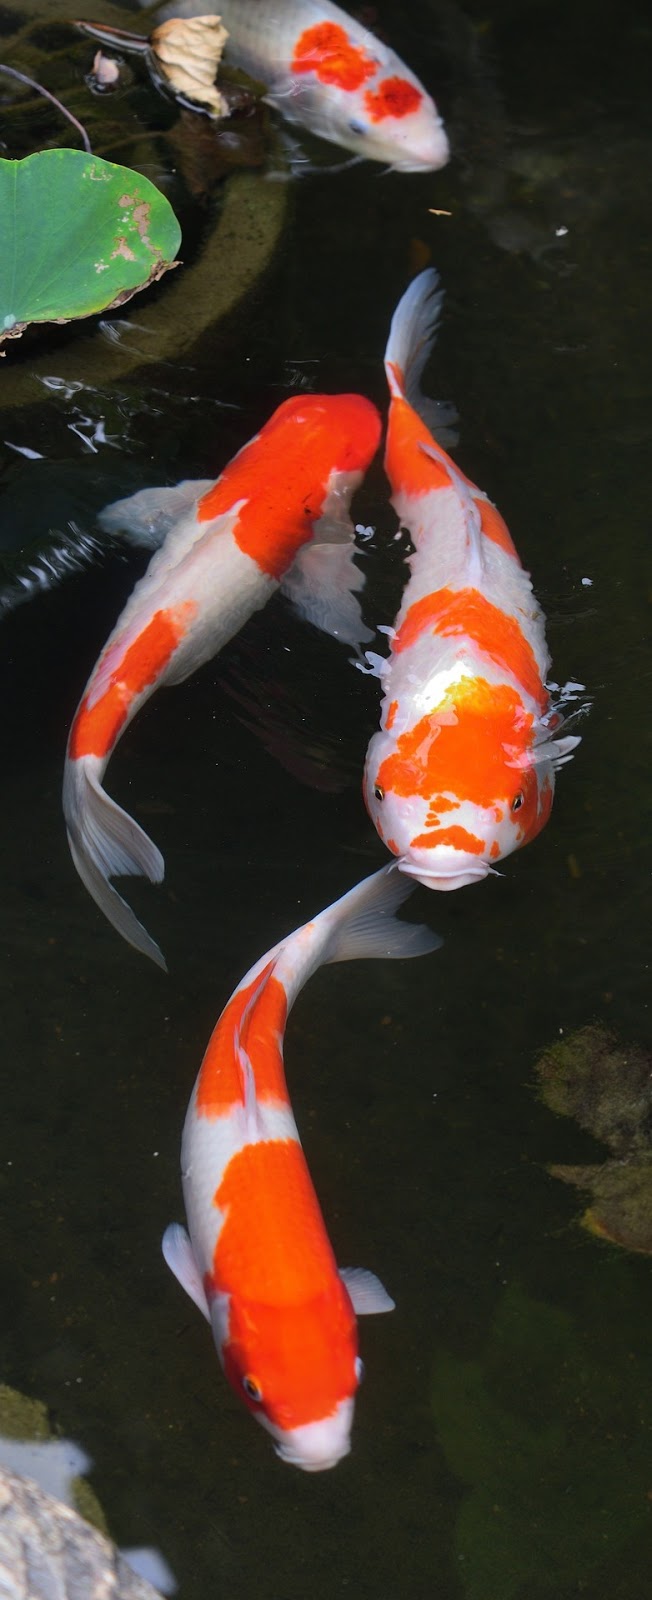 Picture of colorful koi fish at a pond.